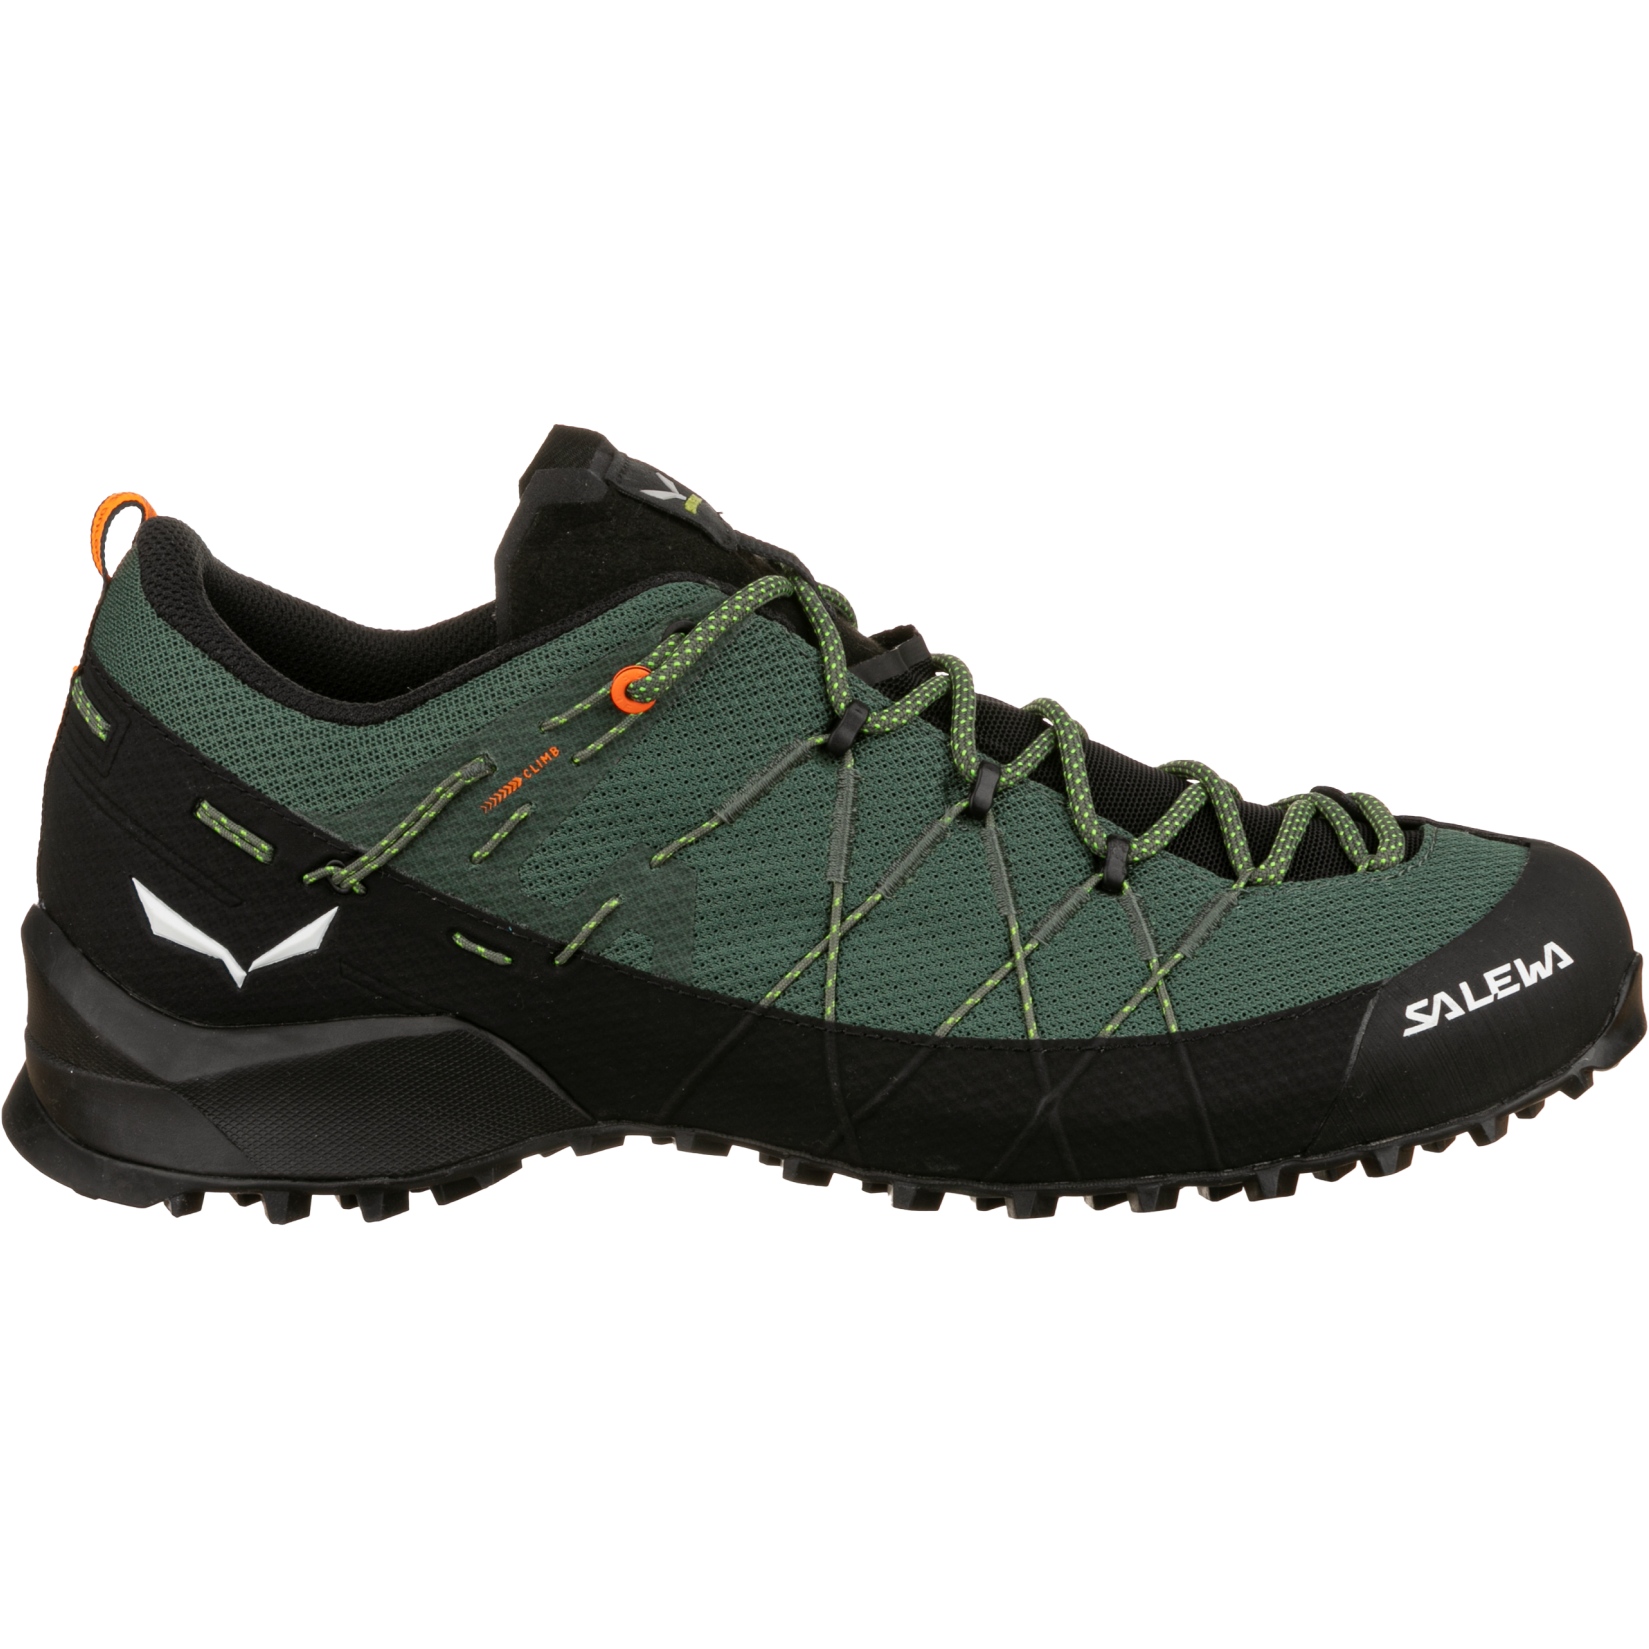 Picture of Salewa Wildfire 2 Approach Shoes - raw green/black 5331